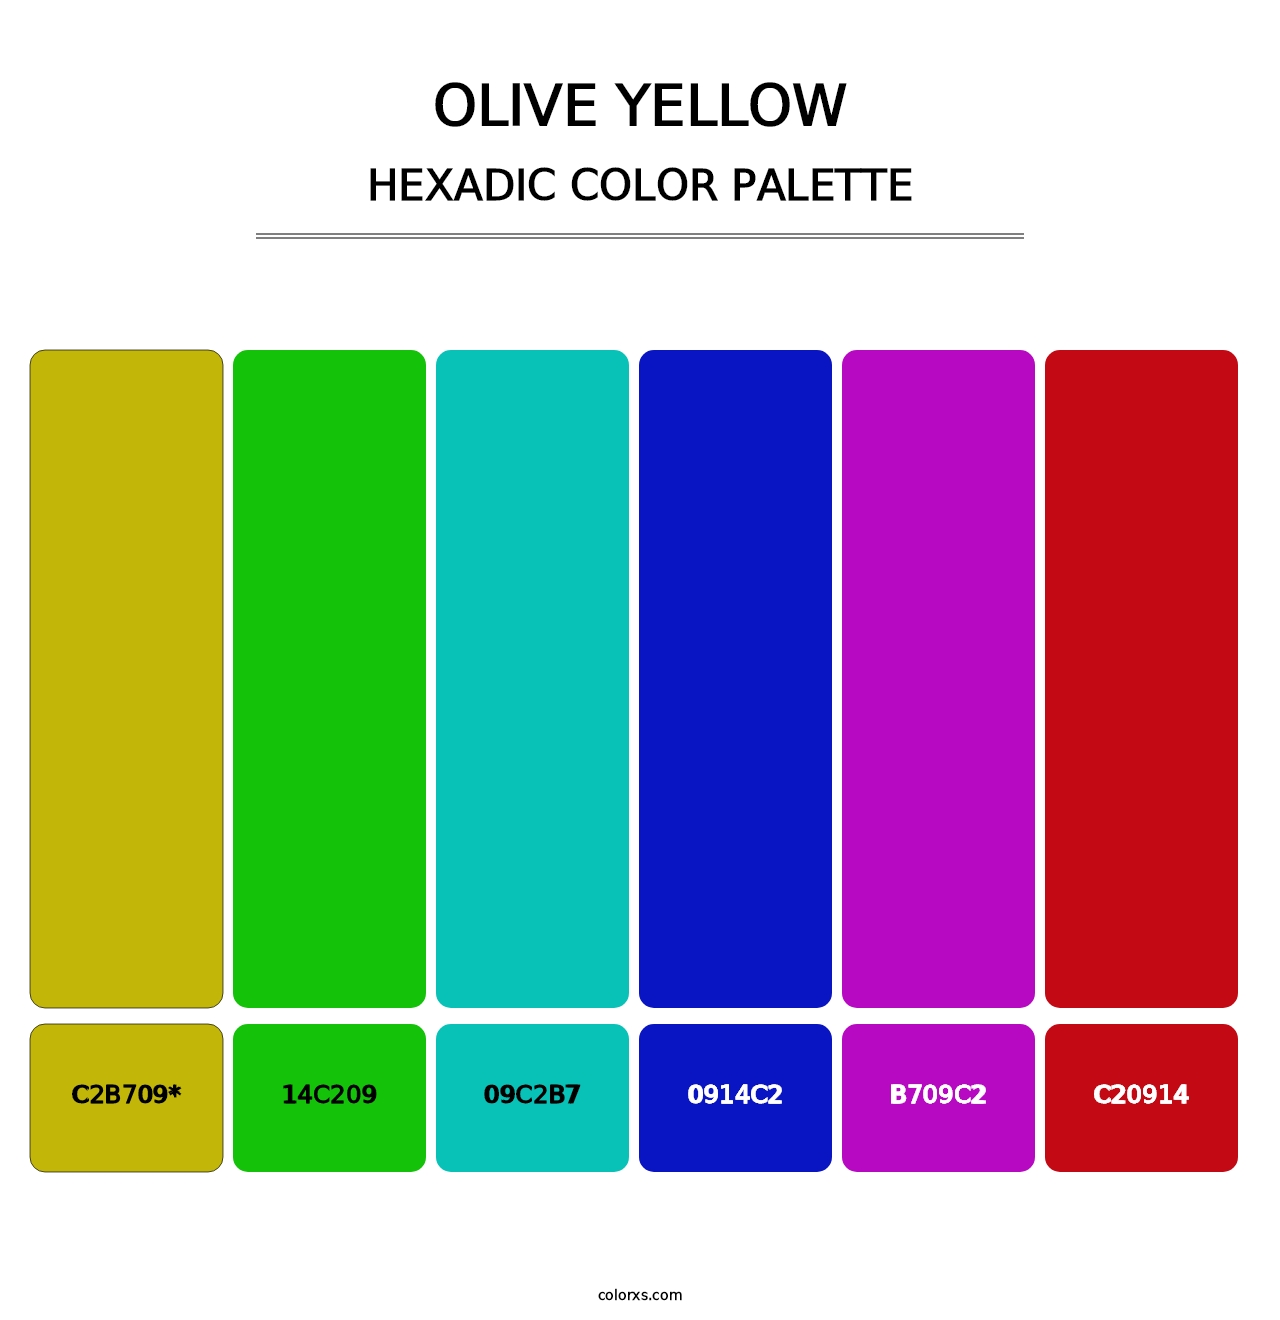 Olive Yellow - Hexadic Color Palette